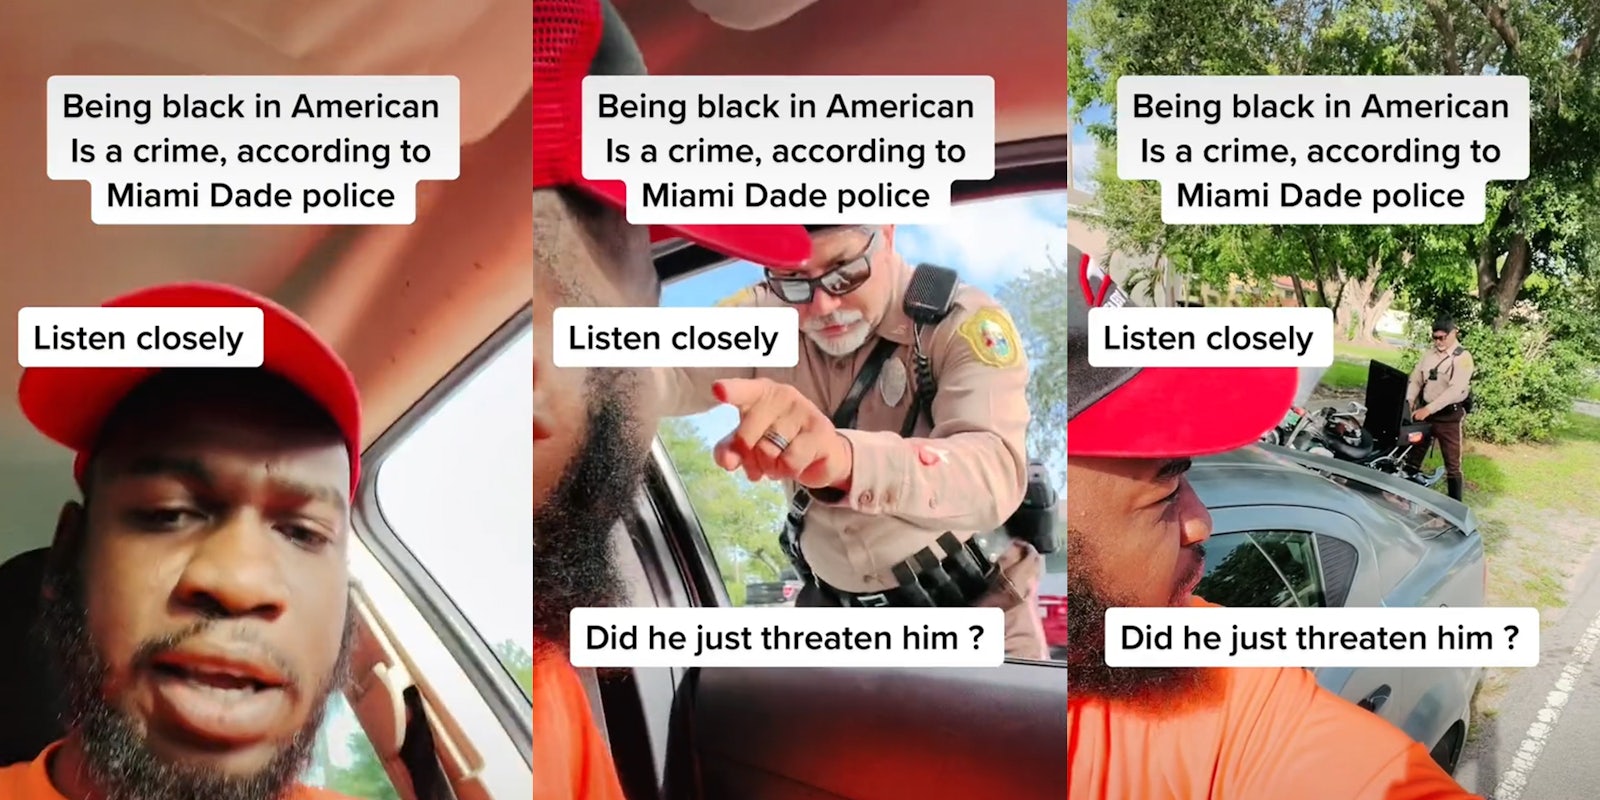 man in car (l) police officer pointing finger in man's face through window (c) police officer on laptop behind car, man standing near driver's side door (r) all with caption 'Being black in American is a crime, according to Miami Dade police' and 'Listen closely'